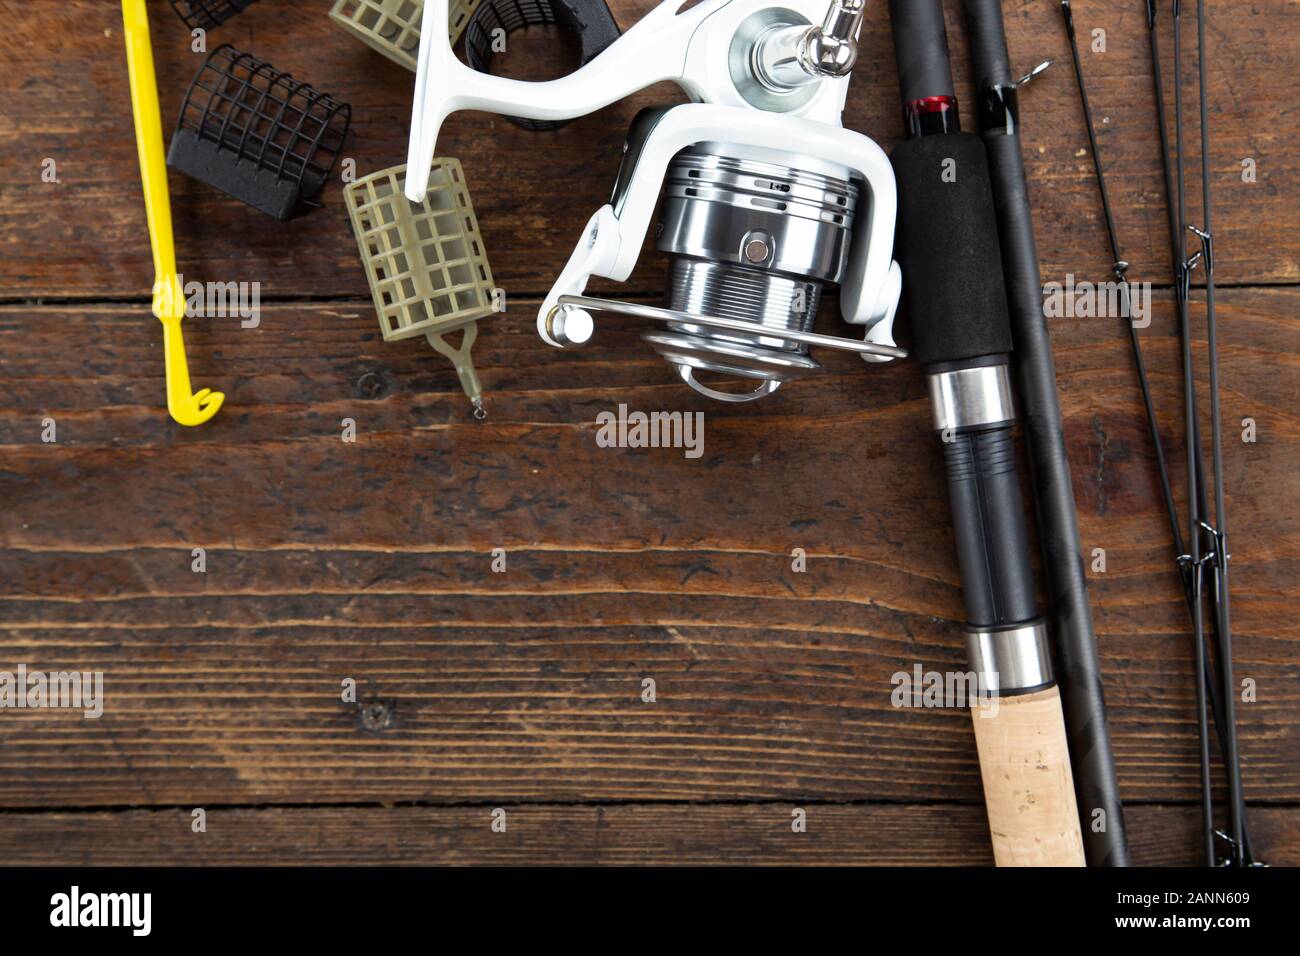 https://c8.alamy.com/comp/2ANN609/fishing-flat-lay-background-with-a-copy-space-fishing-gear-on-a-wooden-table-2ANN609.jpg